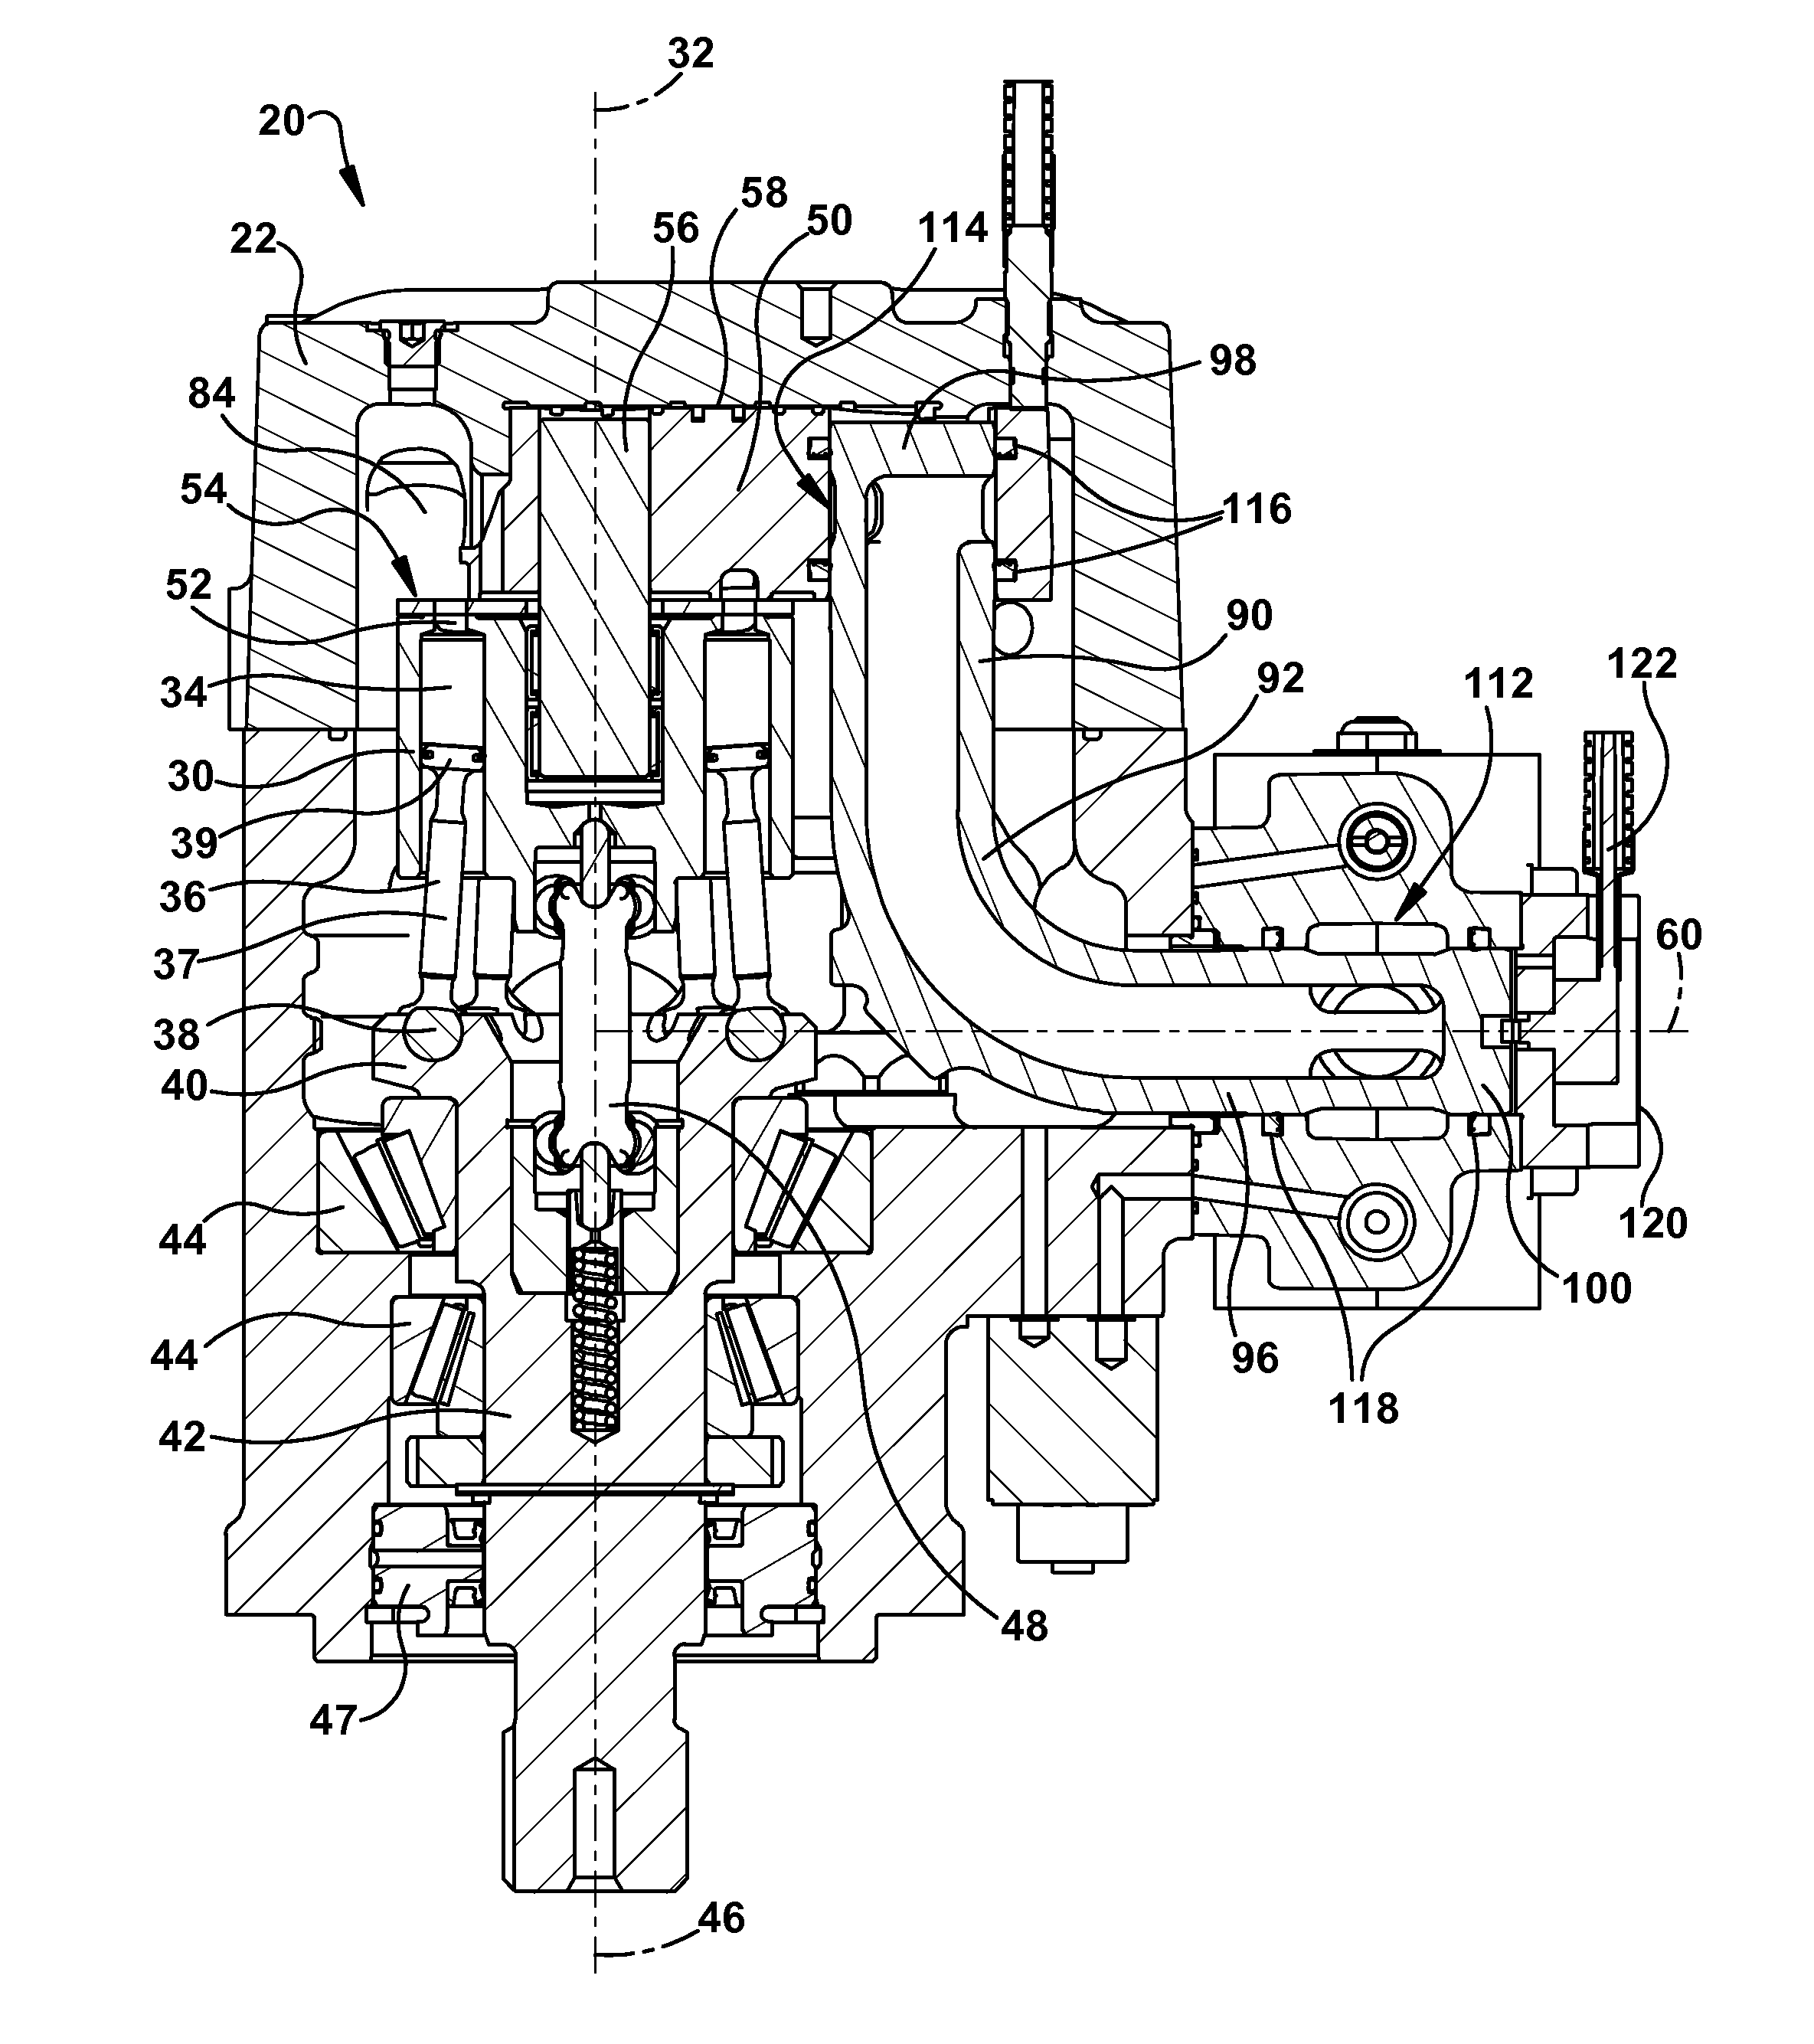 Variable displacement hydraulic pump/motor with hydrostatic valve plate